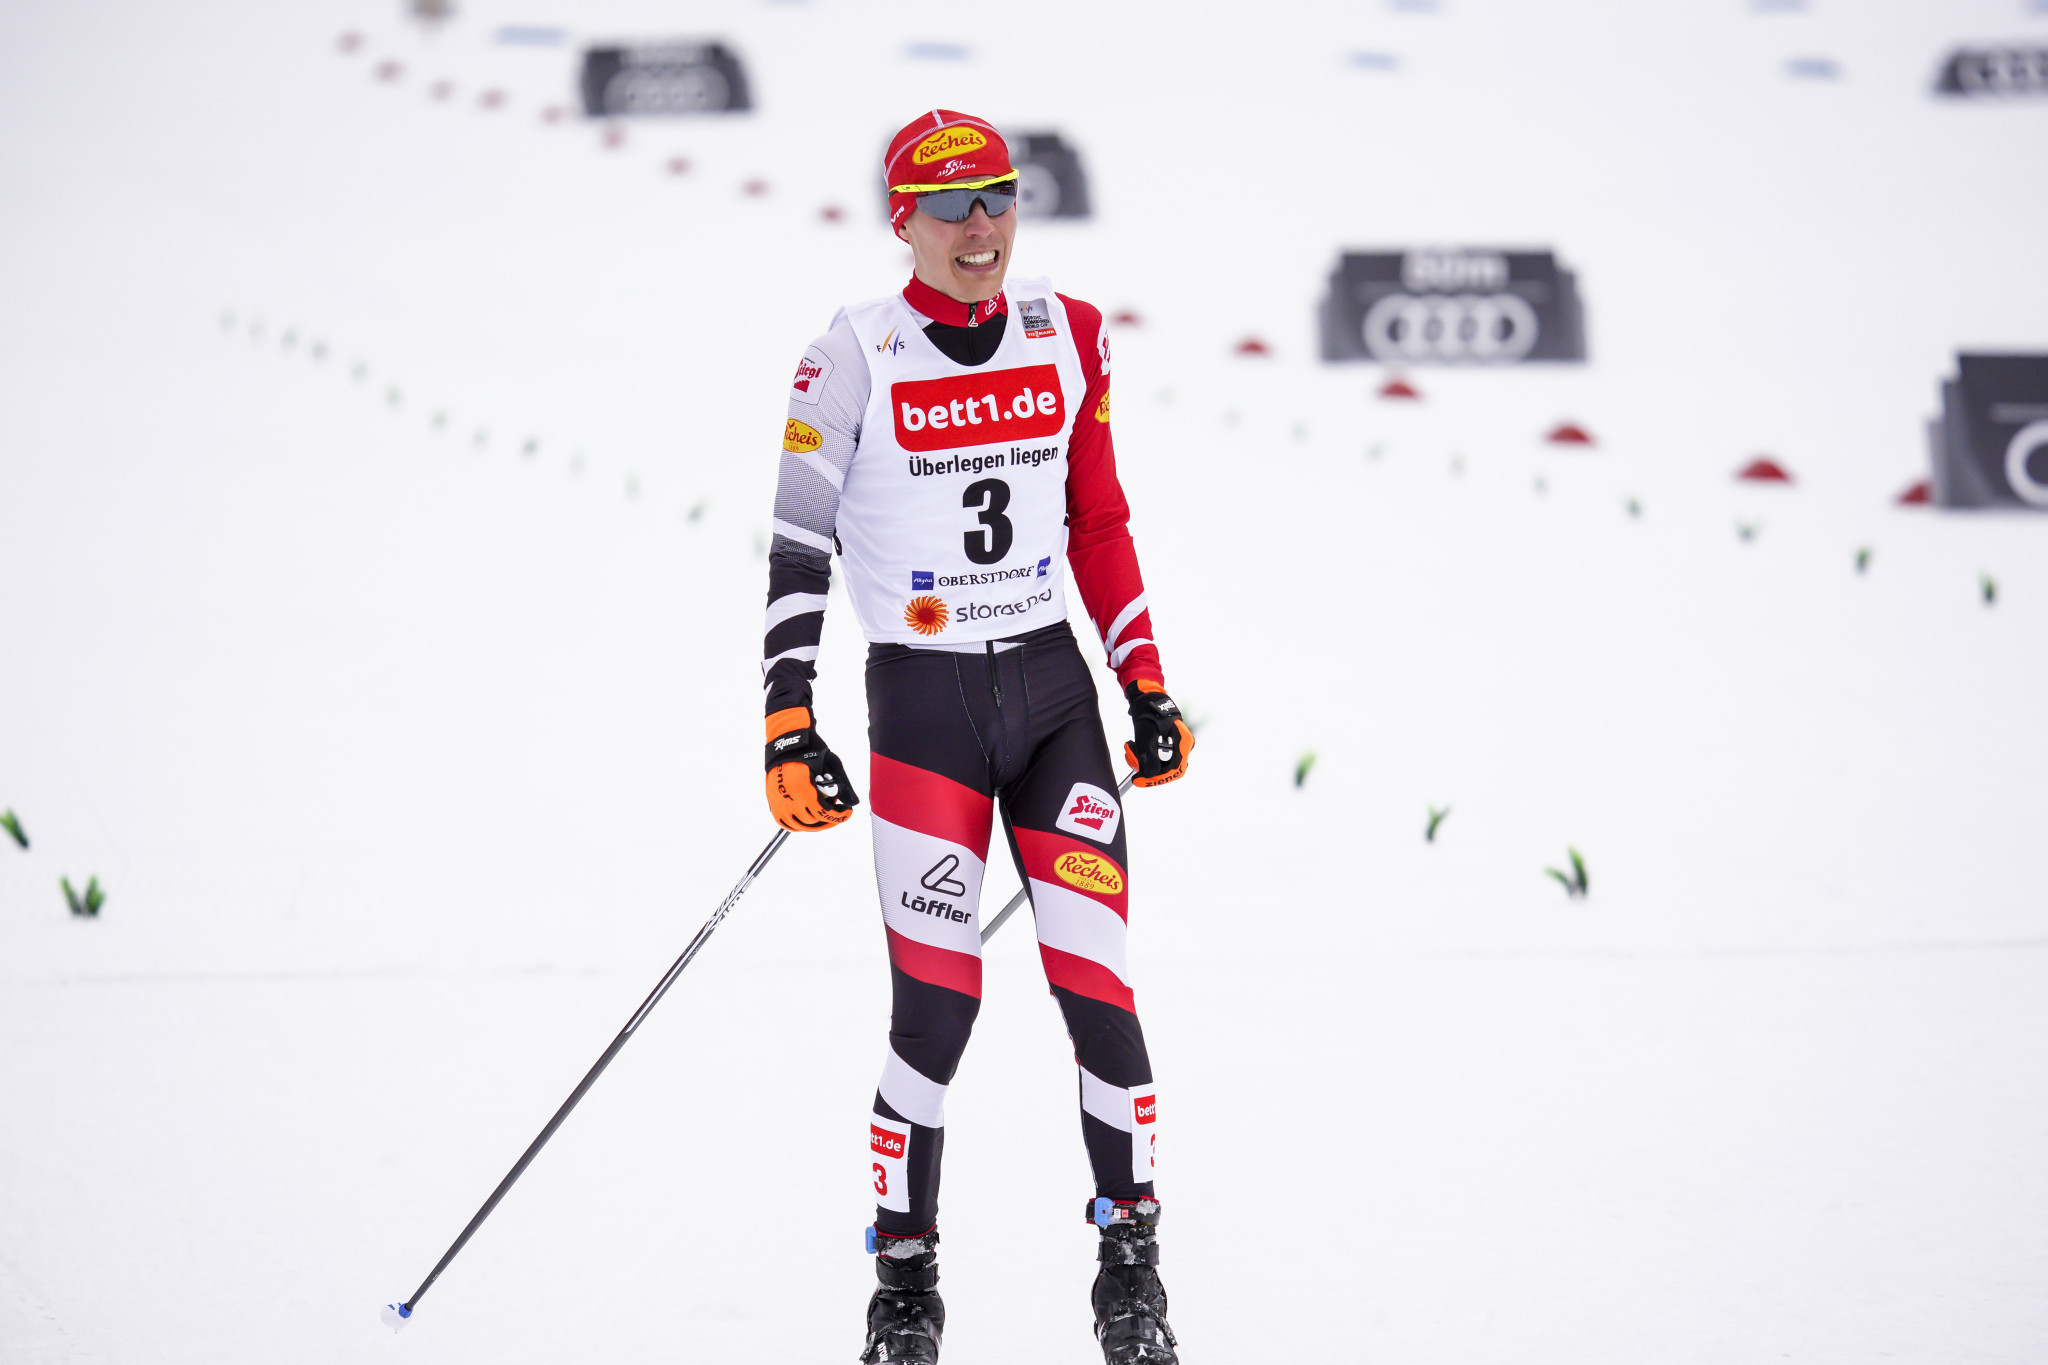 Rehrl and Slamik win provisional competition rounds at Nordic Combined World Cup in Val di Fiemme